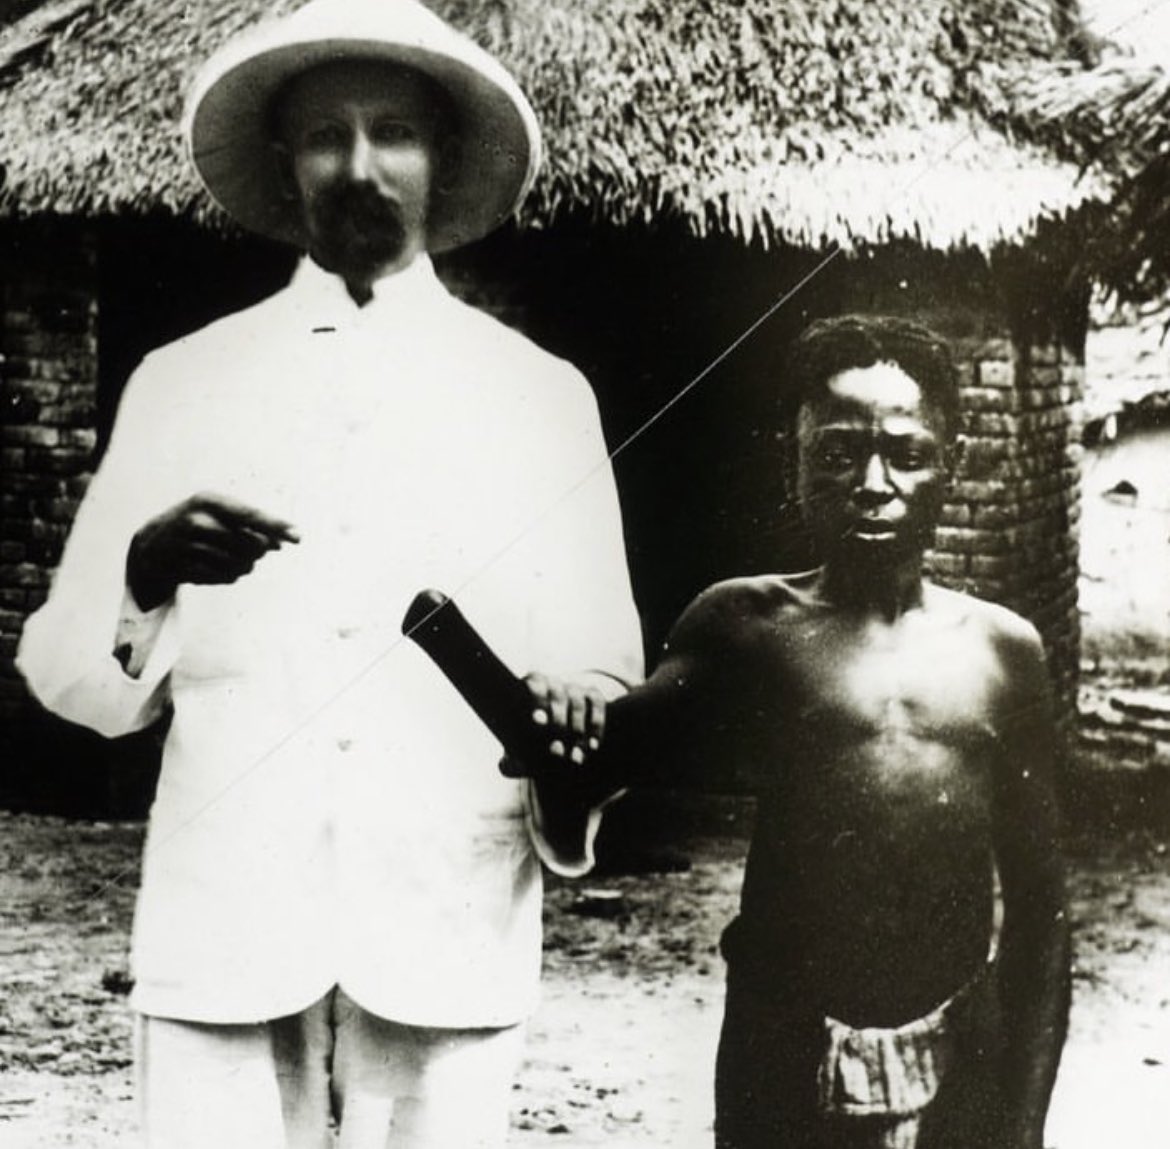 During the late 19th and early 20th centuries, King Leopold II of Belgium ruled over the Congo Free State as his personal colony. Under his exploitative regime, the Congolese people suffered immensely. King Leopold's primary motive was to extract as much wealth as possible from